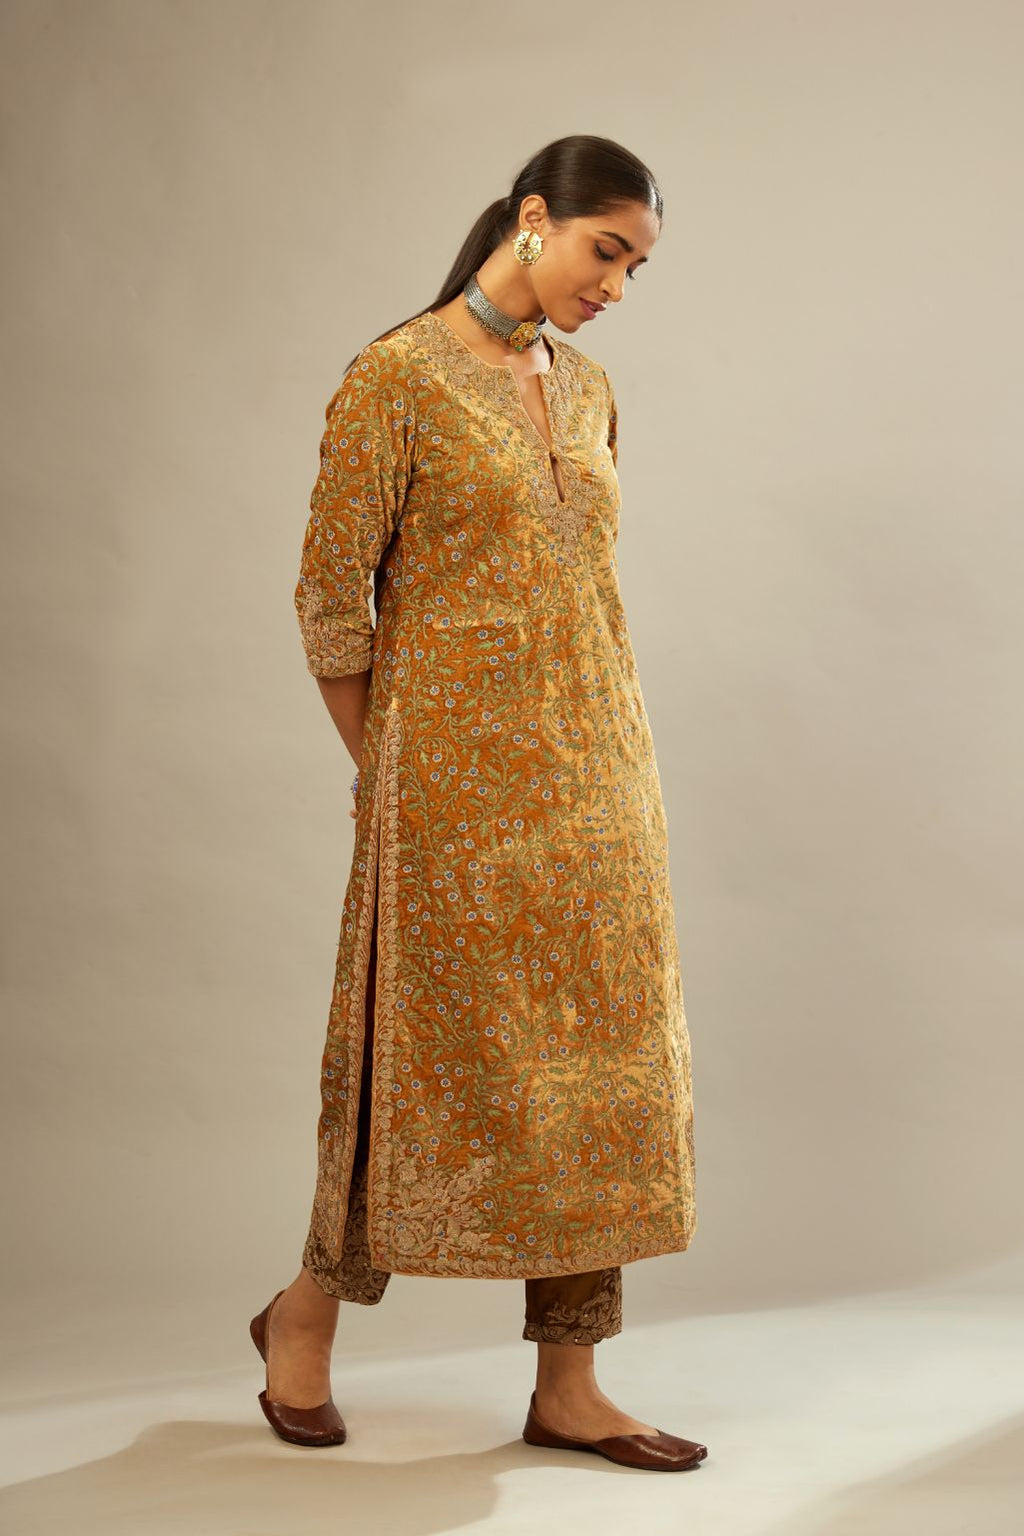 Mustard yellow silk velvet straight kurta set with delicate thread embroidery jaal all-over offset with bold gold dori embroidery at neck, sleeves and hem.